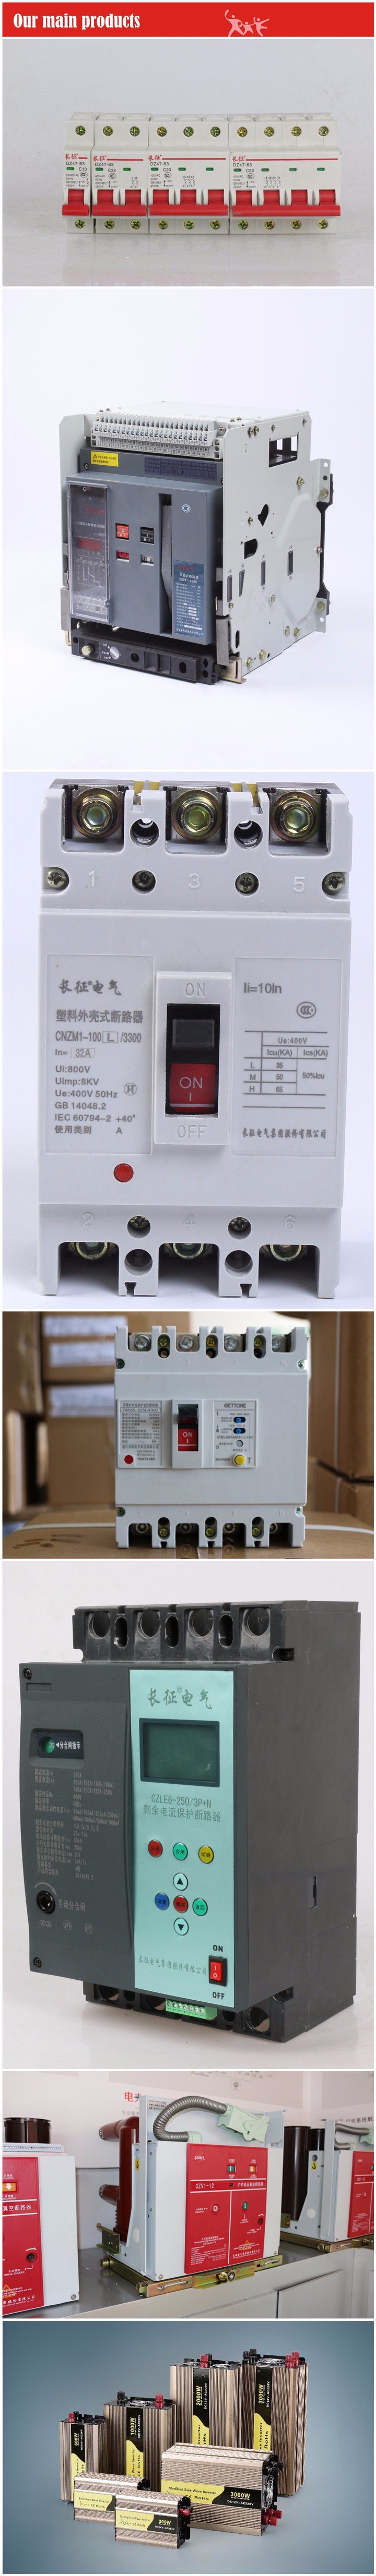 Cabinet Inddor High Voltage Vacuum Circuit Breaker Universal Circuit Breakers Ce RoHS Approved Factory Direct